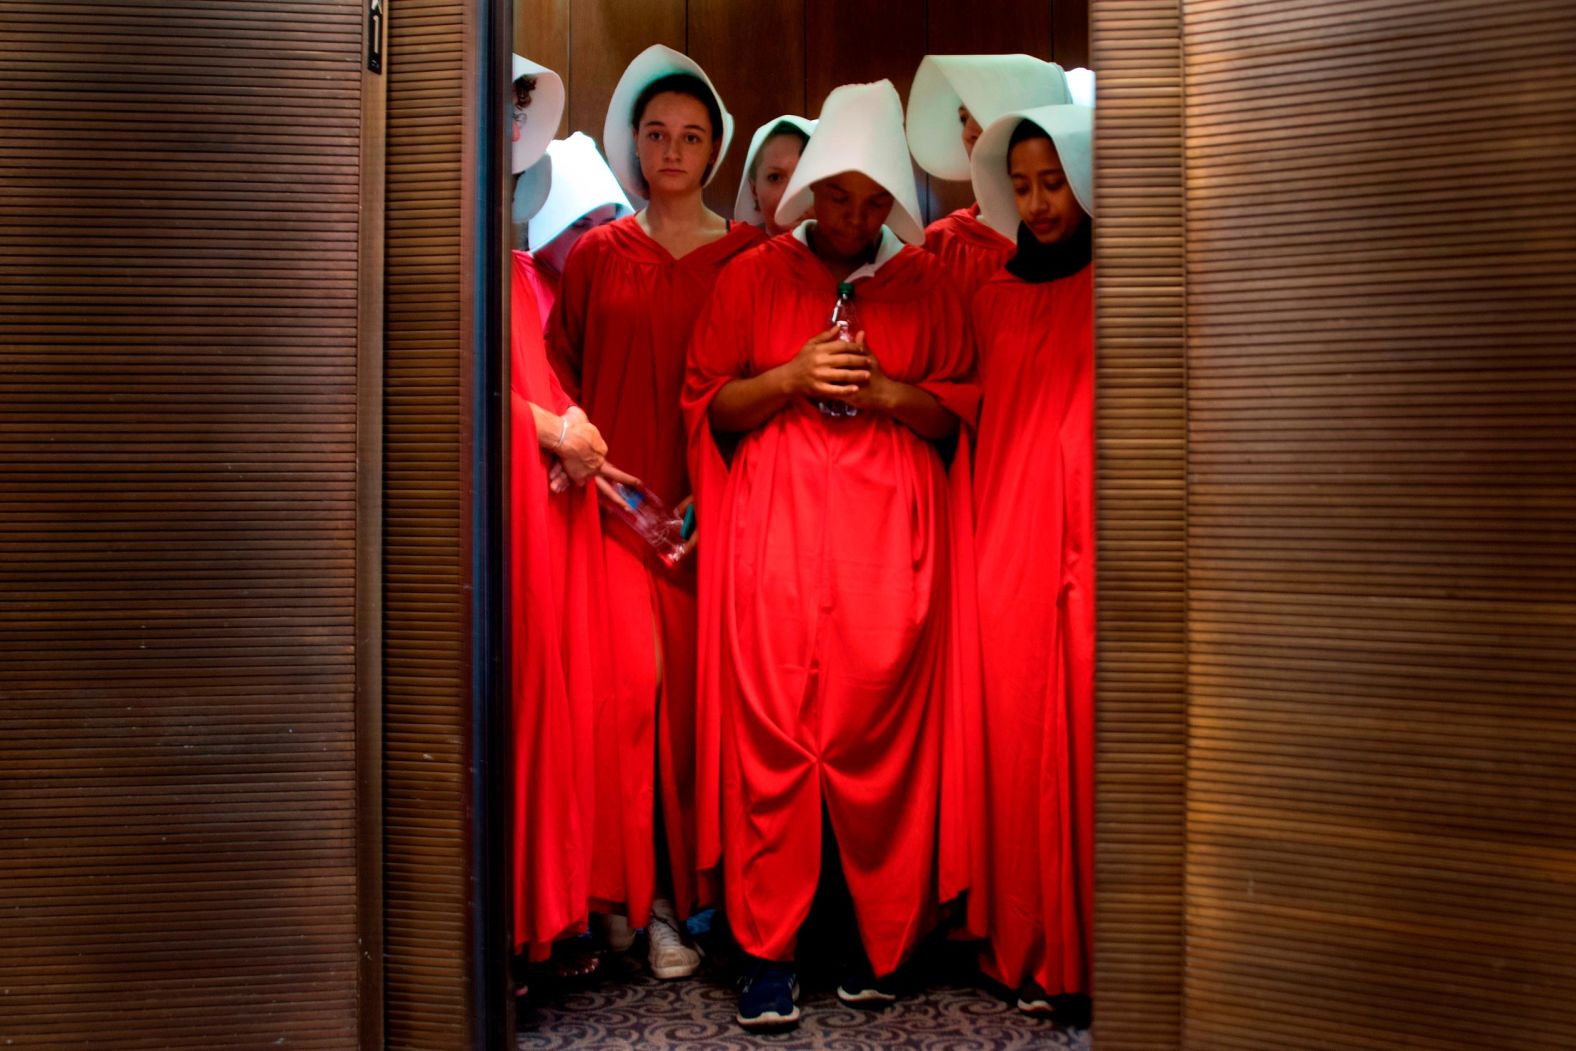 Protesters dressed as characters from the TV show "The Handmaid's Tale" stand in an elevator at the Hart Senate Office Building on Tuesday. <a href="index.php?page=&url=https%3A%2F%2Fwww.cnn.com%2F2018%2F09%2F05%2Fpolitics%2Fkavanaugh-senate-hearing-handmaids-tale-protesters%2Findex.html" target="_blank">The costumes have become a popular symbol for women's rights,</a> not only in the United States but across the globe.